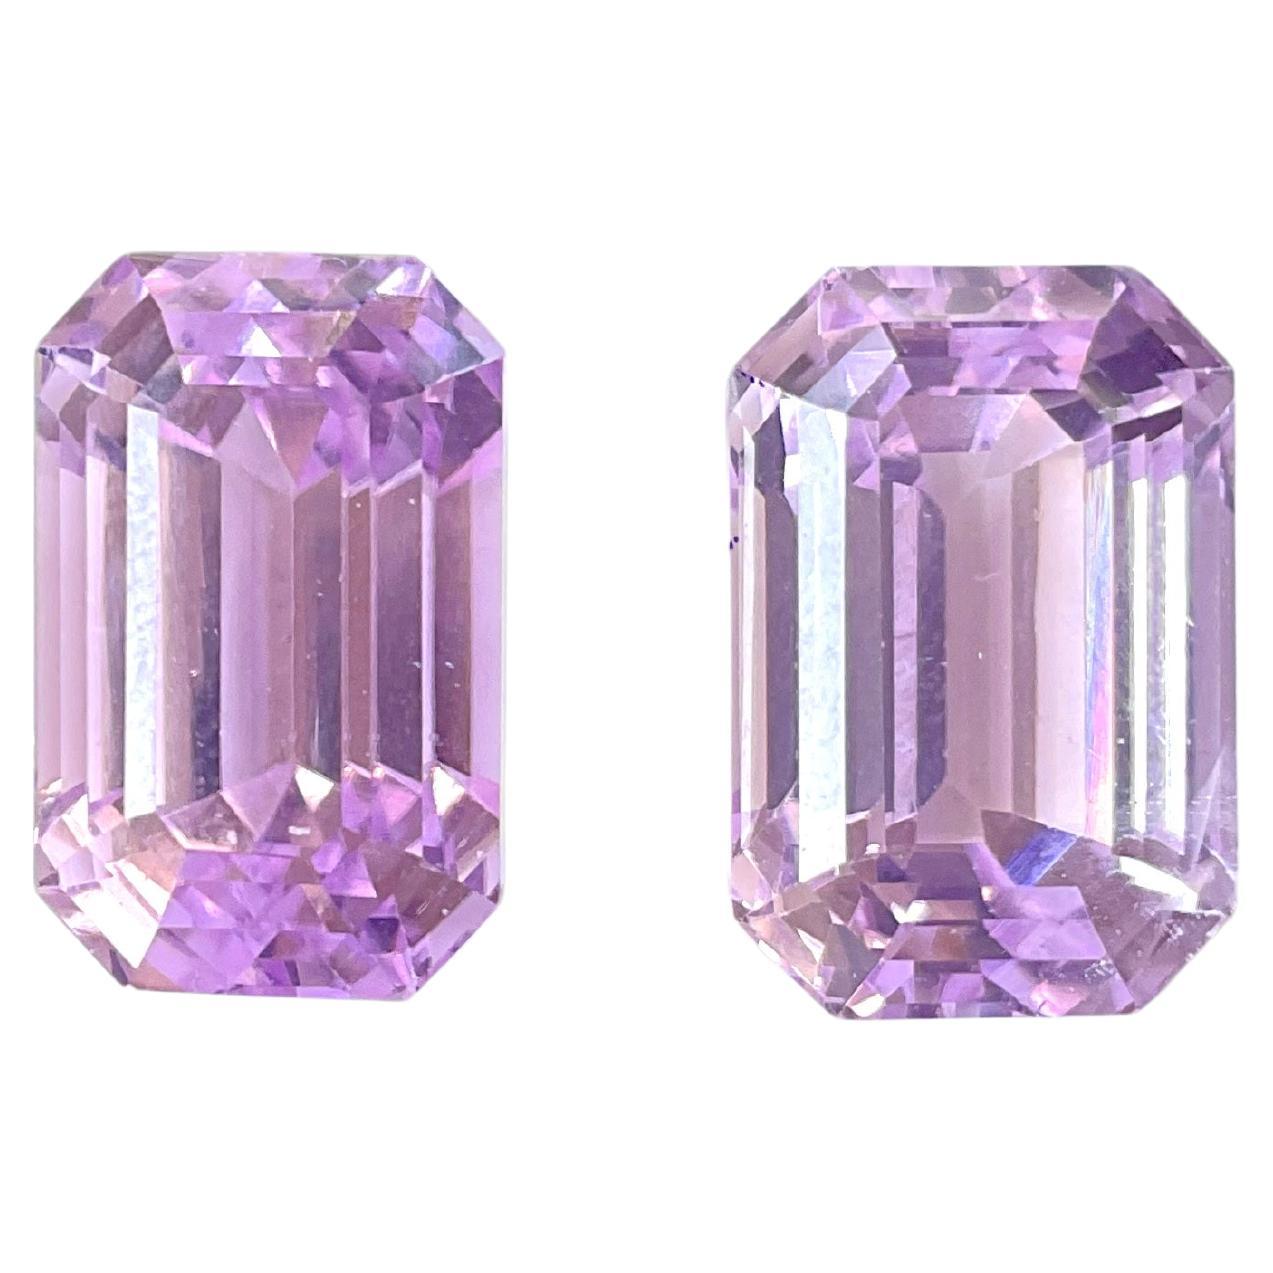 35.58 Carats Pink Kunzite Octagon Pair Natural Cut Stone For Fine Gem Jewellery For Sale